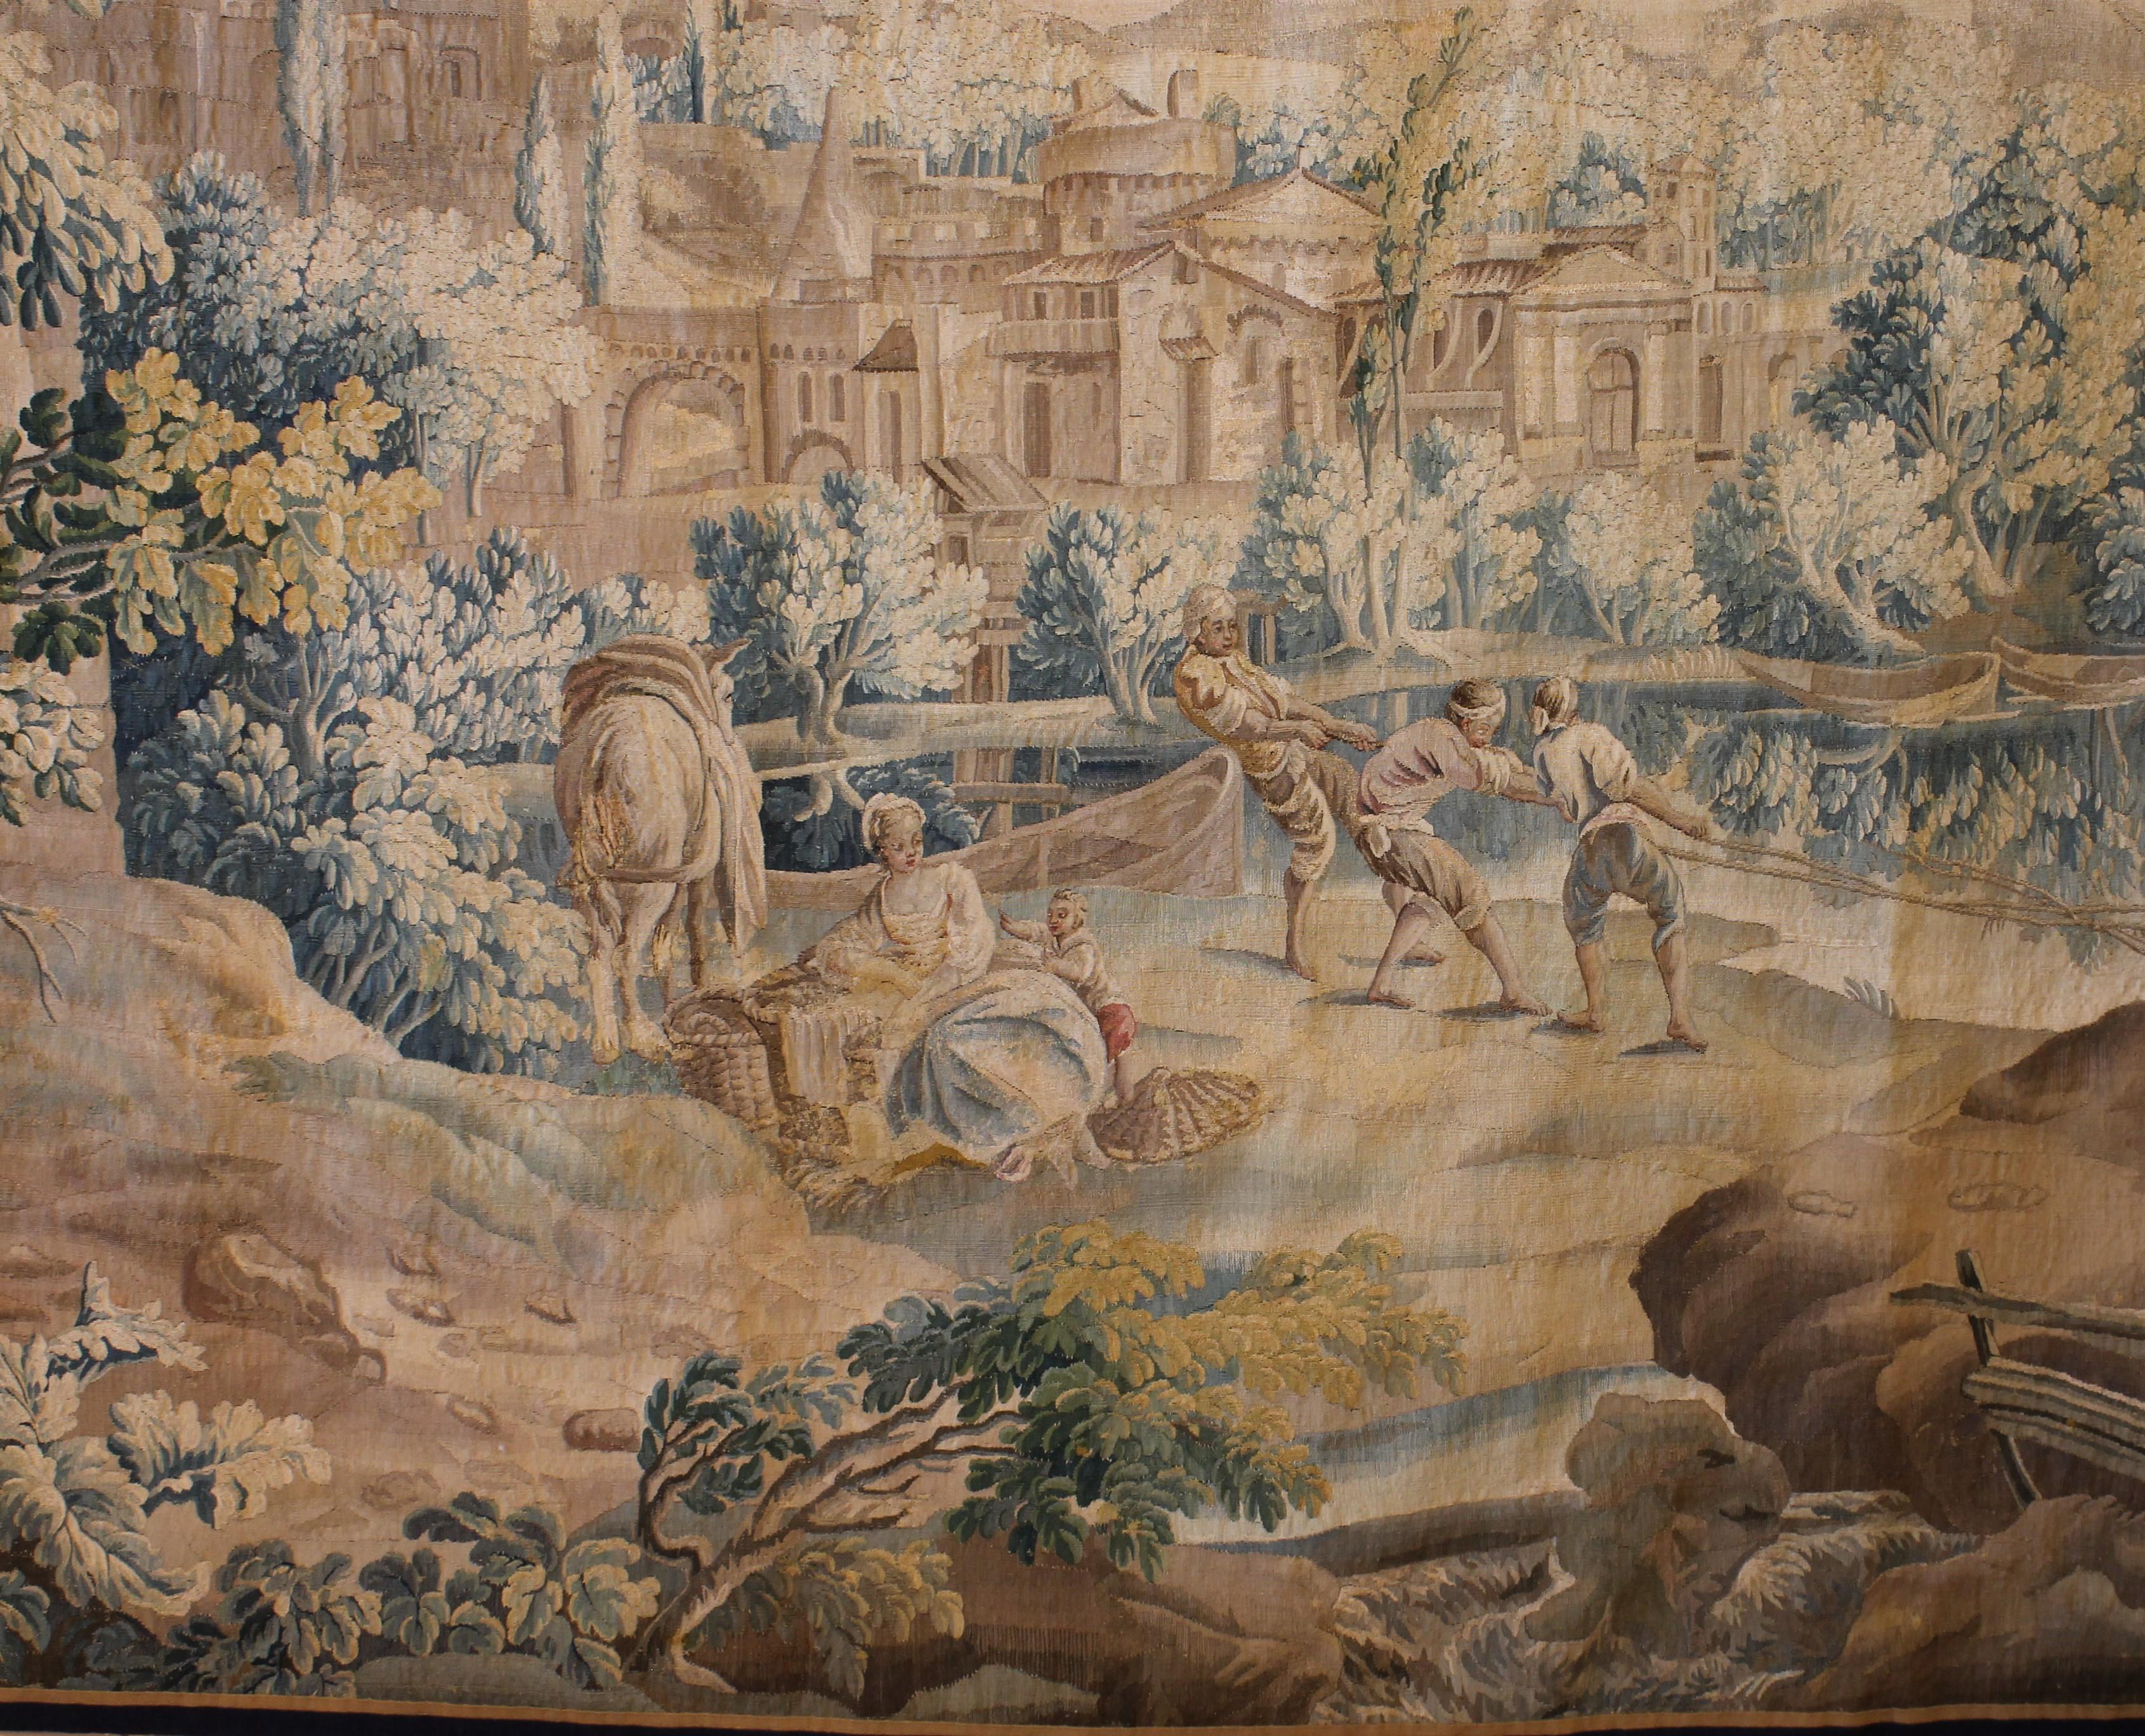 Superb 18th century Aubusson tapestry representing a village scene from france
tapestry in very good condition which has kept very beautiful colors in pastel tones and which is ready to be placed directly in an interior.

The tapestry is quarter